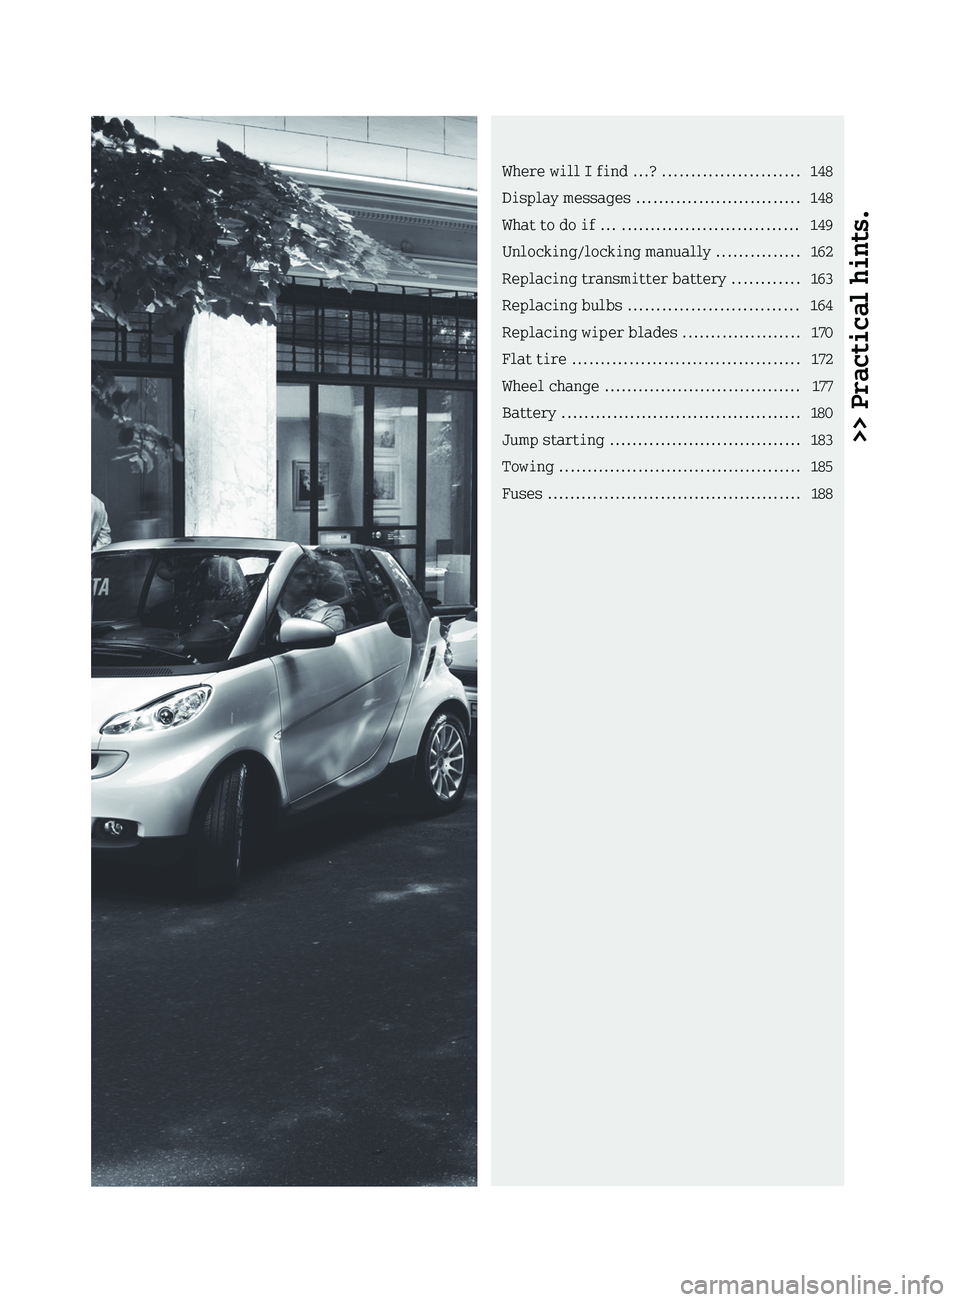 SMART FORTWO COUPE 2010  Owners Manual >> Practical hints.Where will I find ...? ........................148
Display messages  ............................. 148
What to do if ...  ............................... 149
Unlocking/locking manua